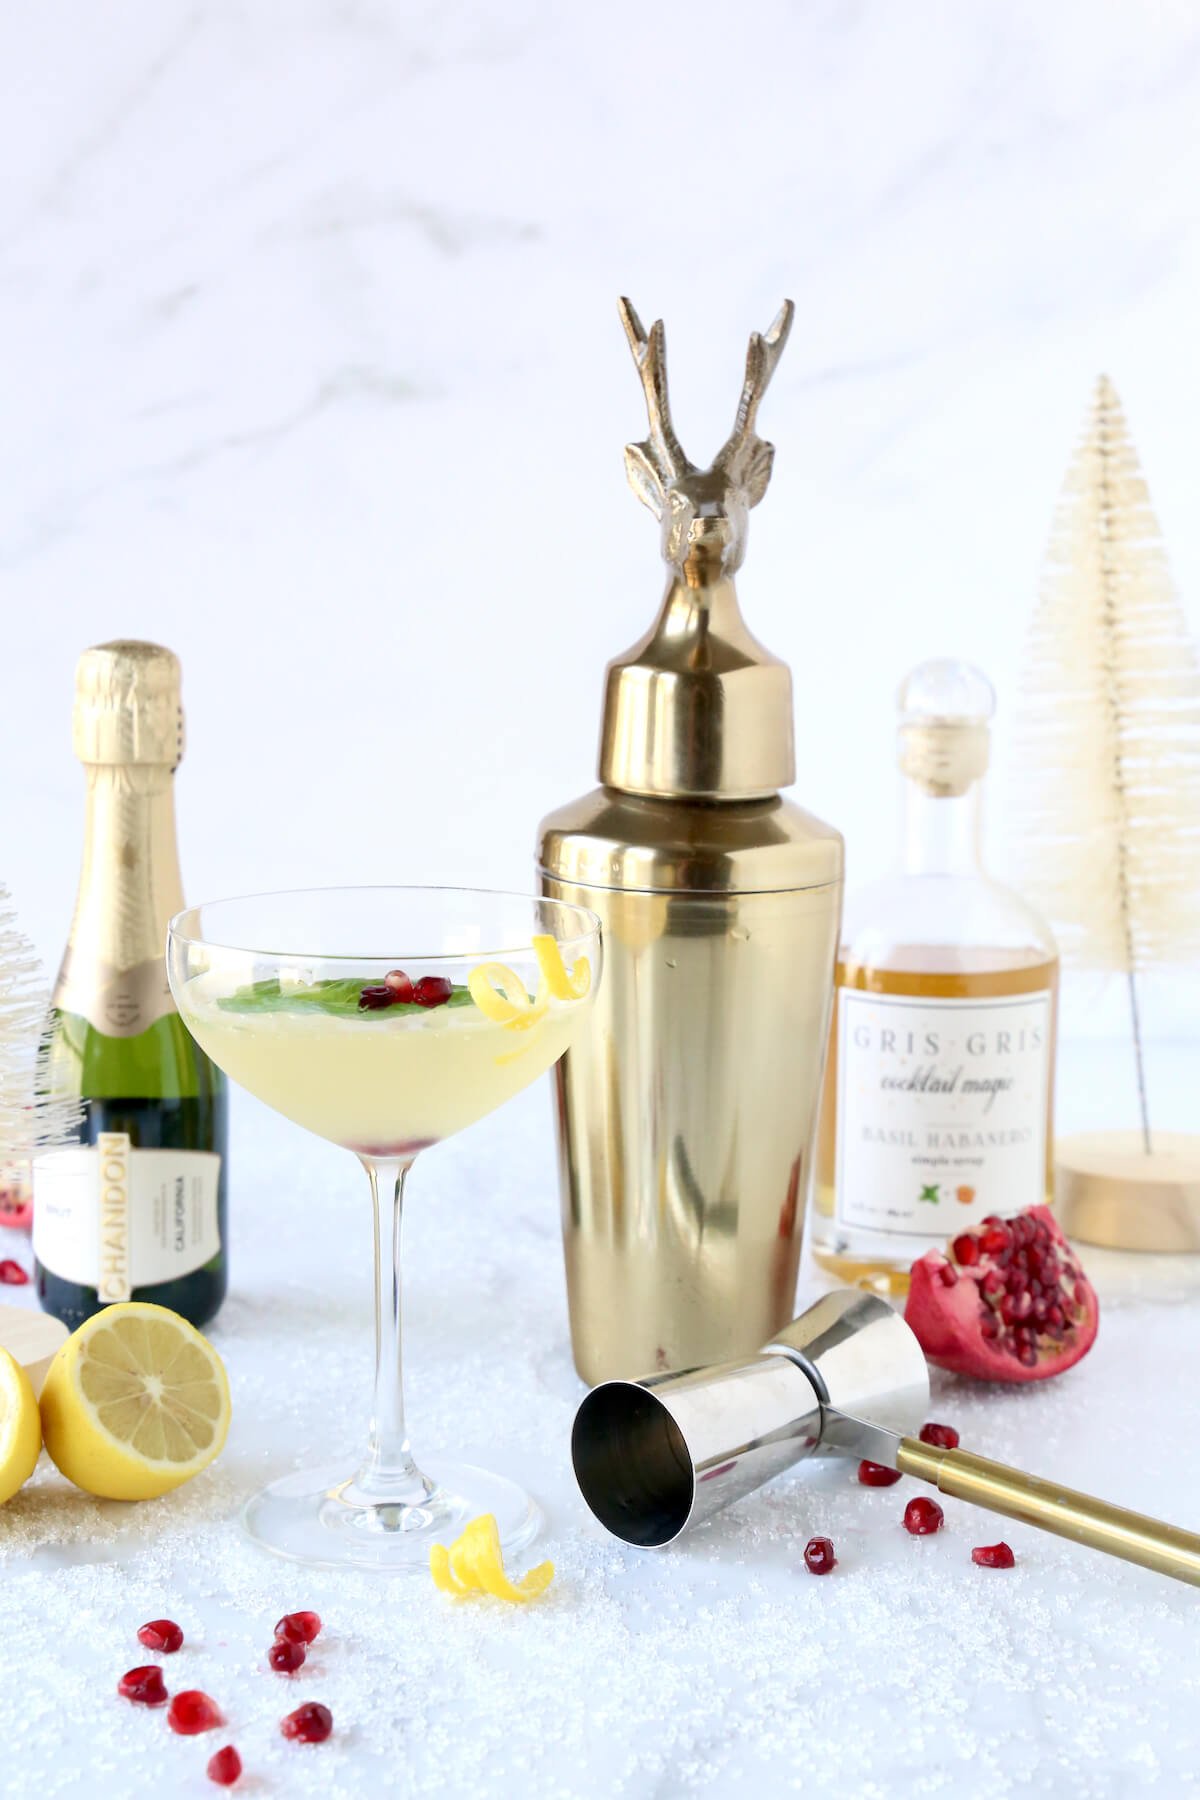 A gold cocktail shaker next to a small bottle of champagne, a glass jar, lemons, a glass with clear liquid and pomegranate seeds.